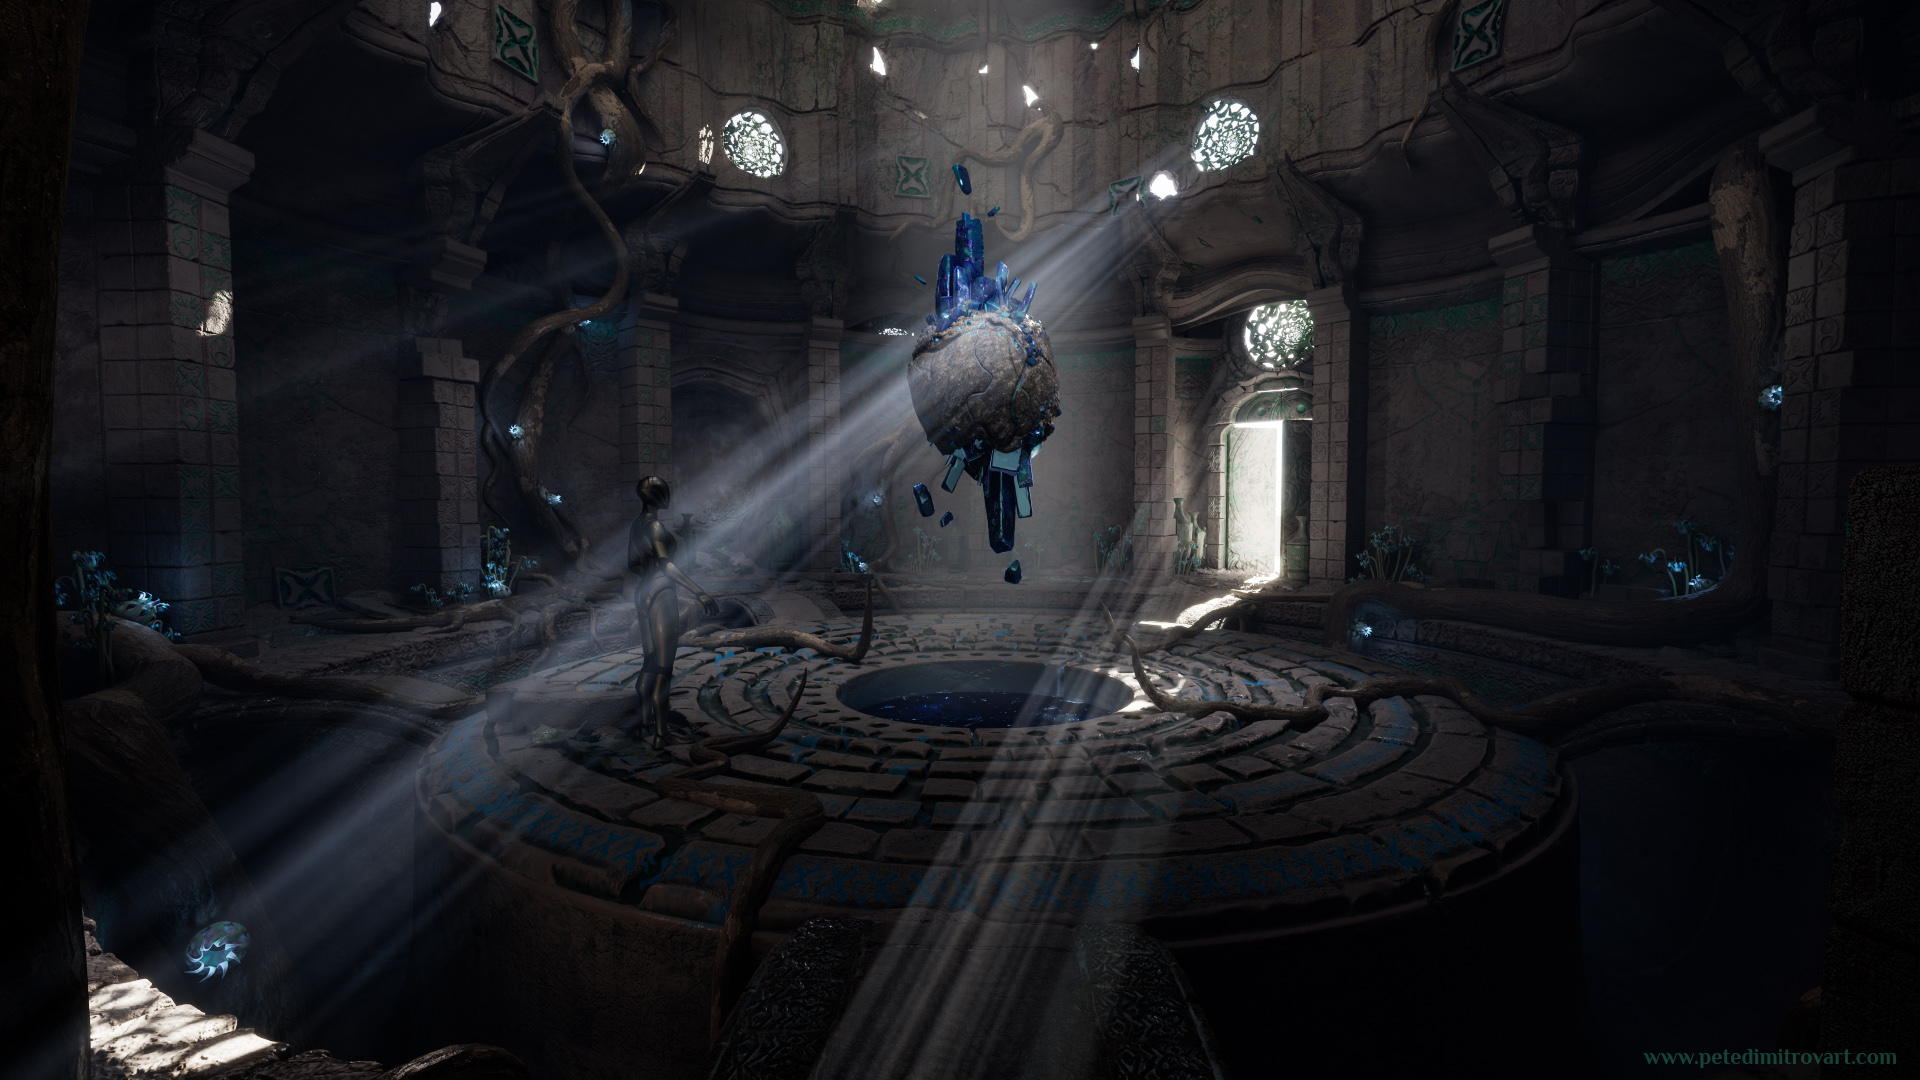 The main, lower camera angle, from inside Unreal 5. Looks at the crystal hovering in the middle of the picture. To the left of it is a metal looking placeholder mannequin that showcases the scale of the room and the crystal orb.